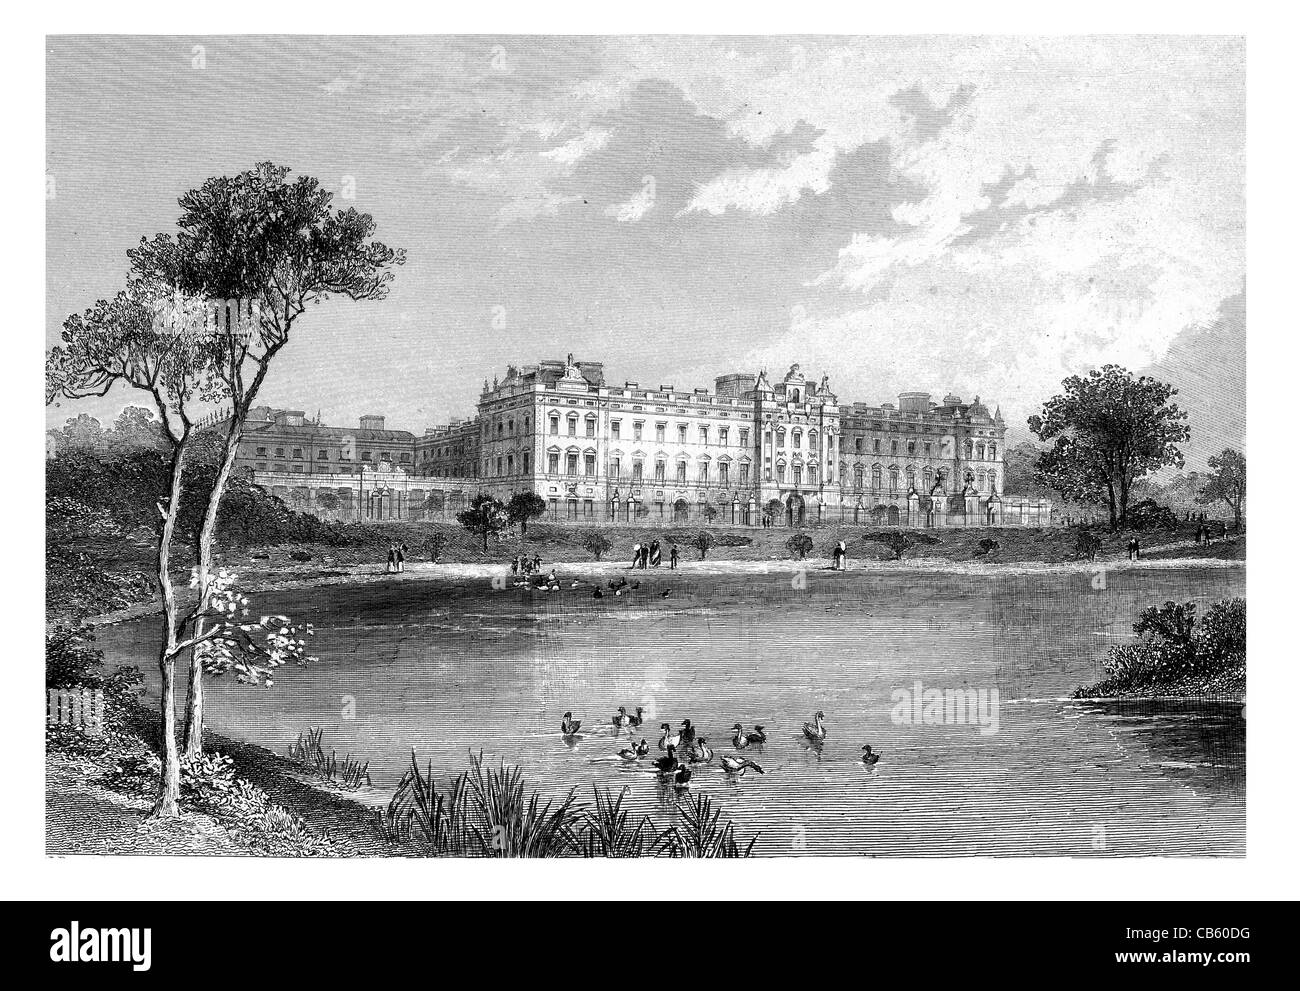 Buckingham Palace London Royal residence British monarch Westminster England Queen King lake pond Stock Photo